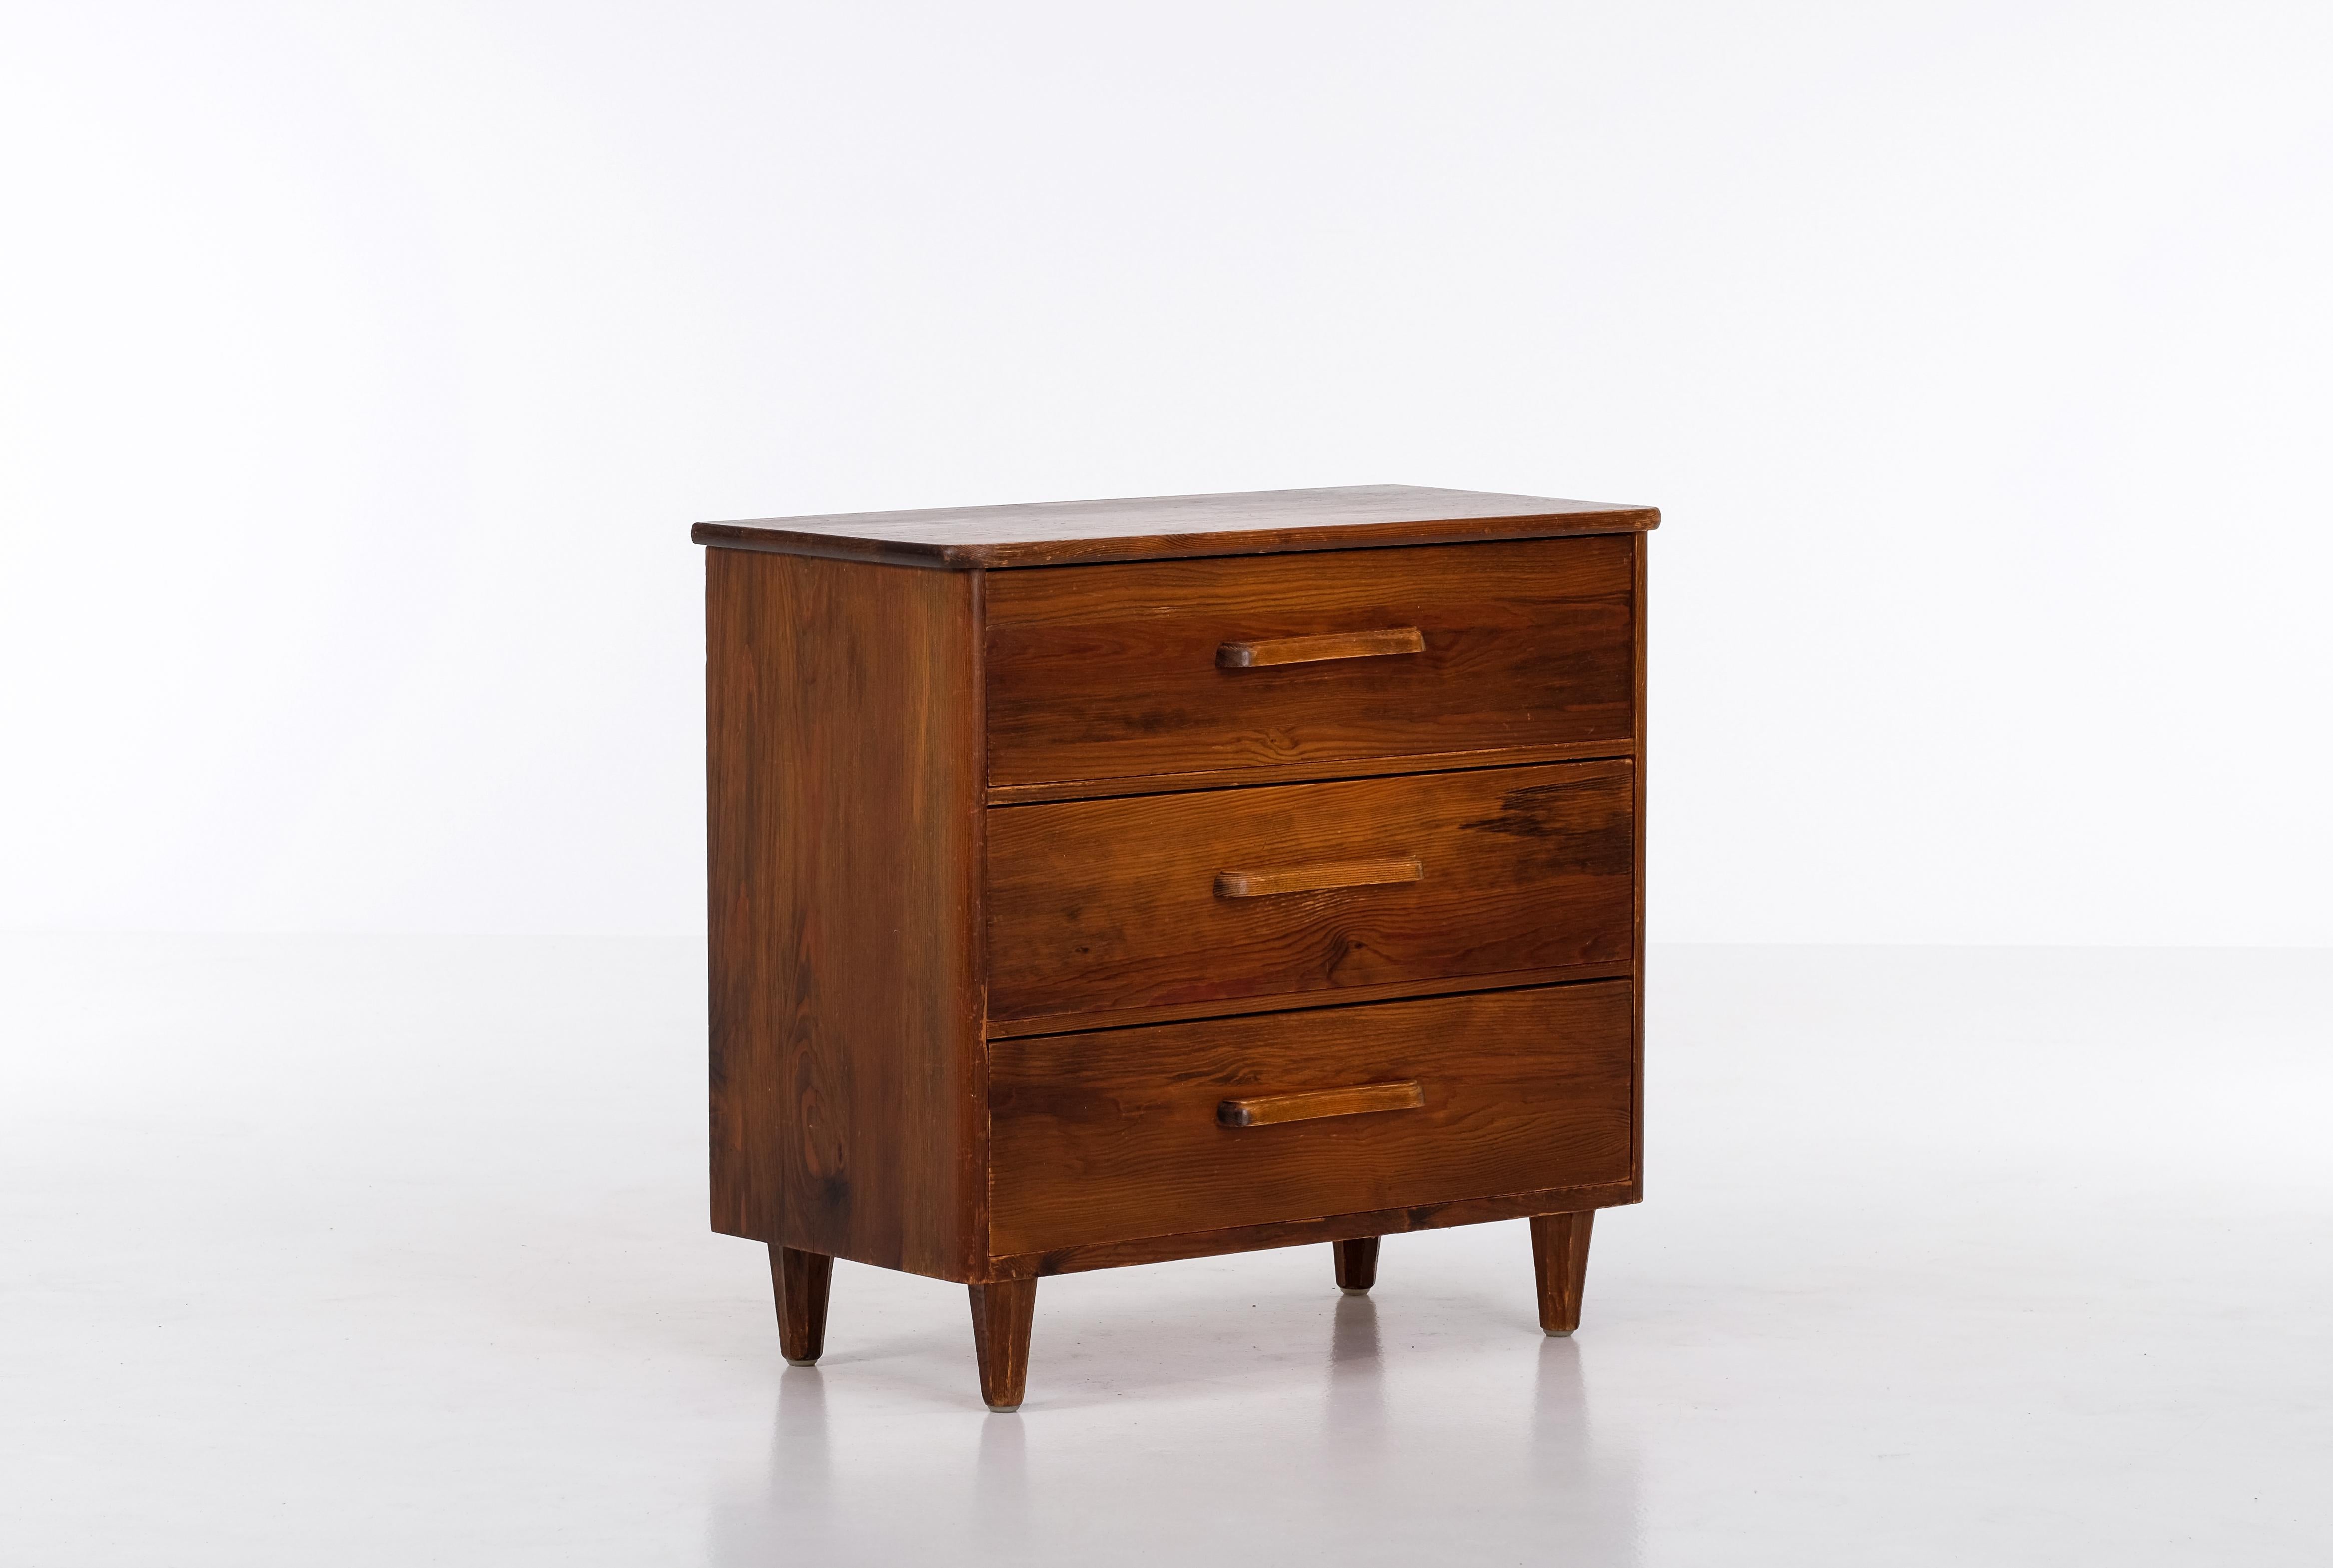 Mid-20th Century Bureau / Chest of Drawers in pine, Sweden, 1940s For Sale